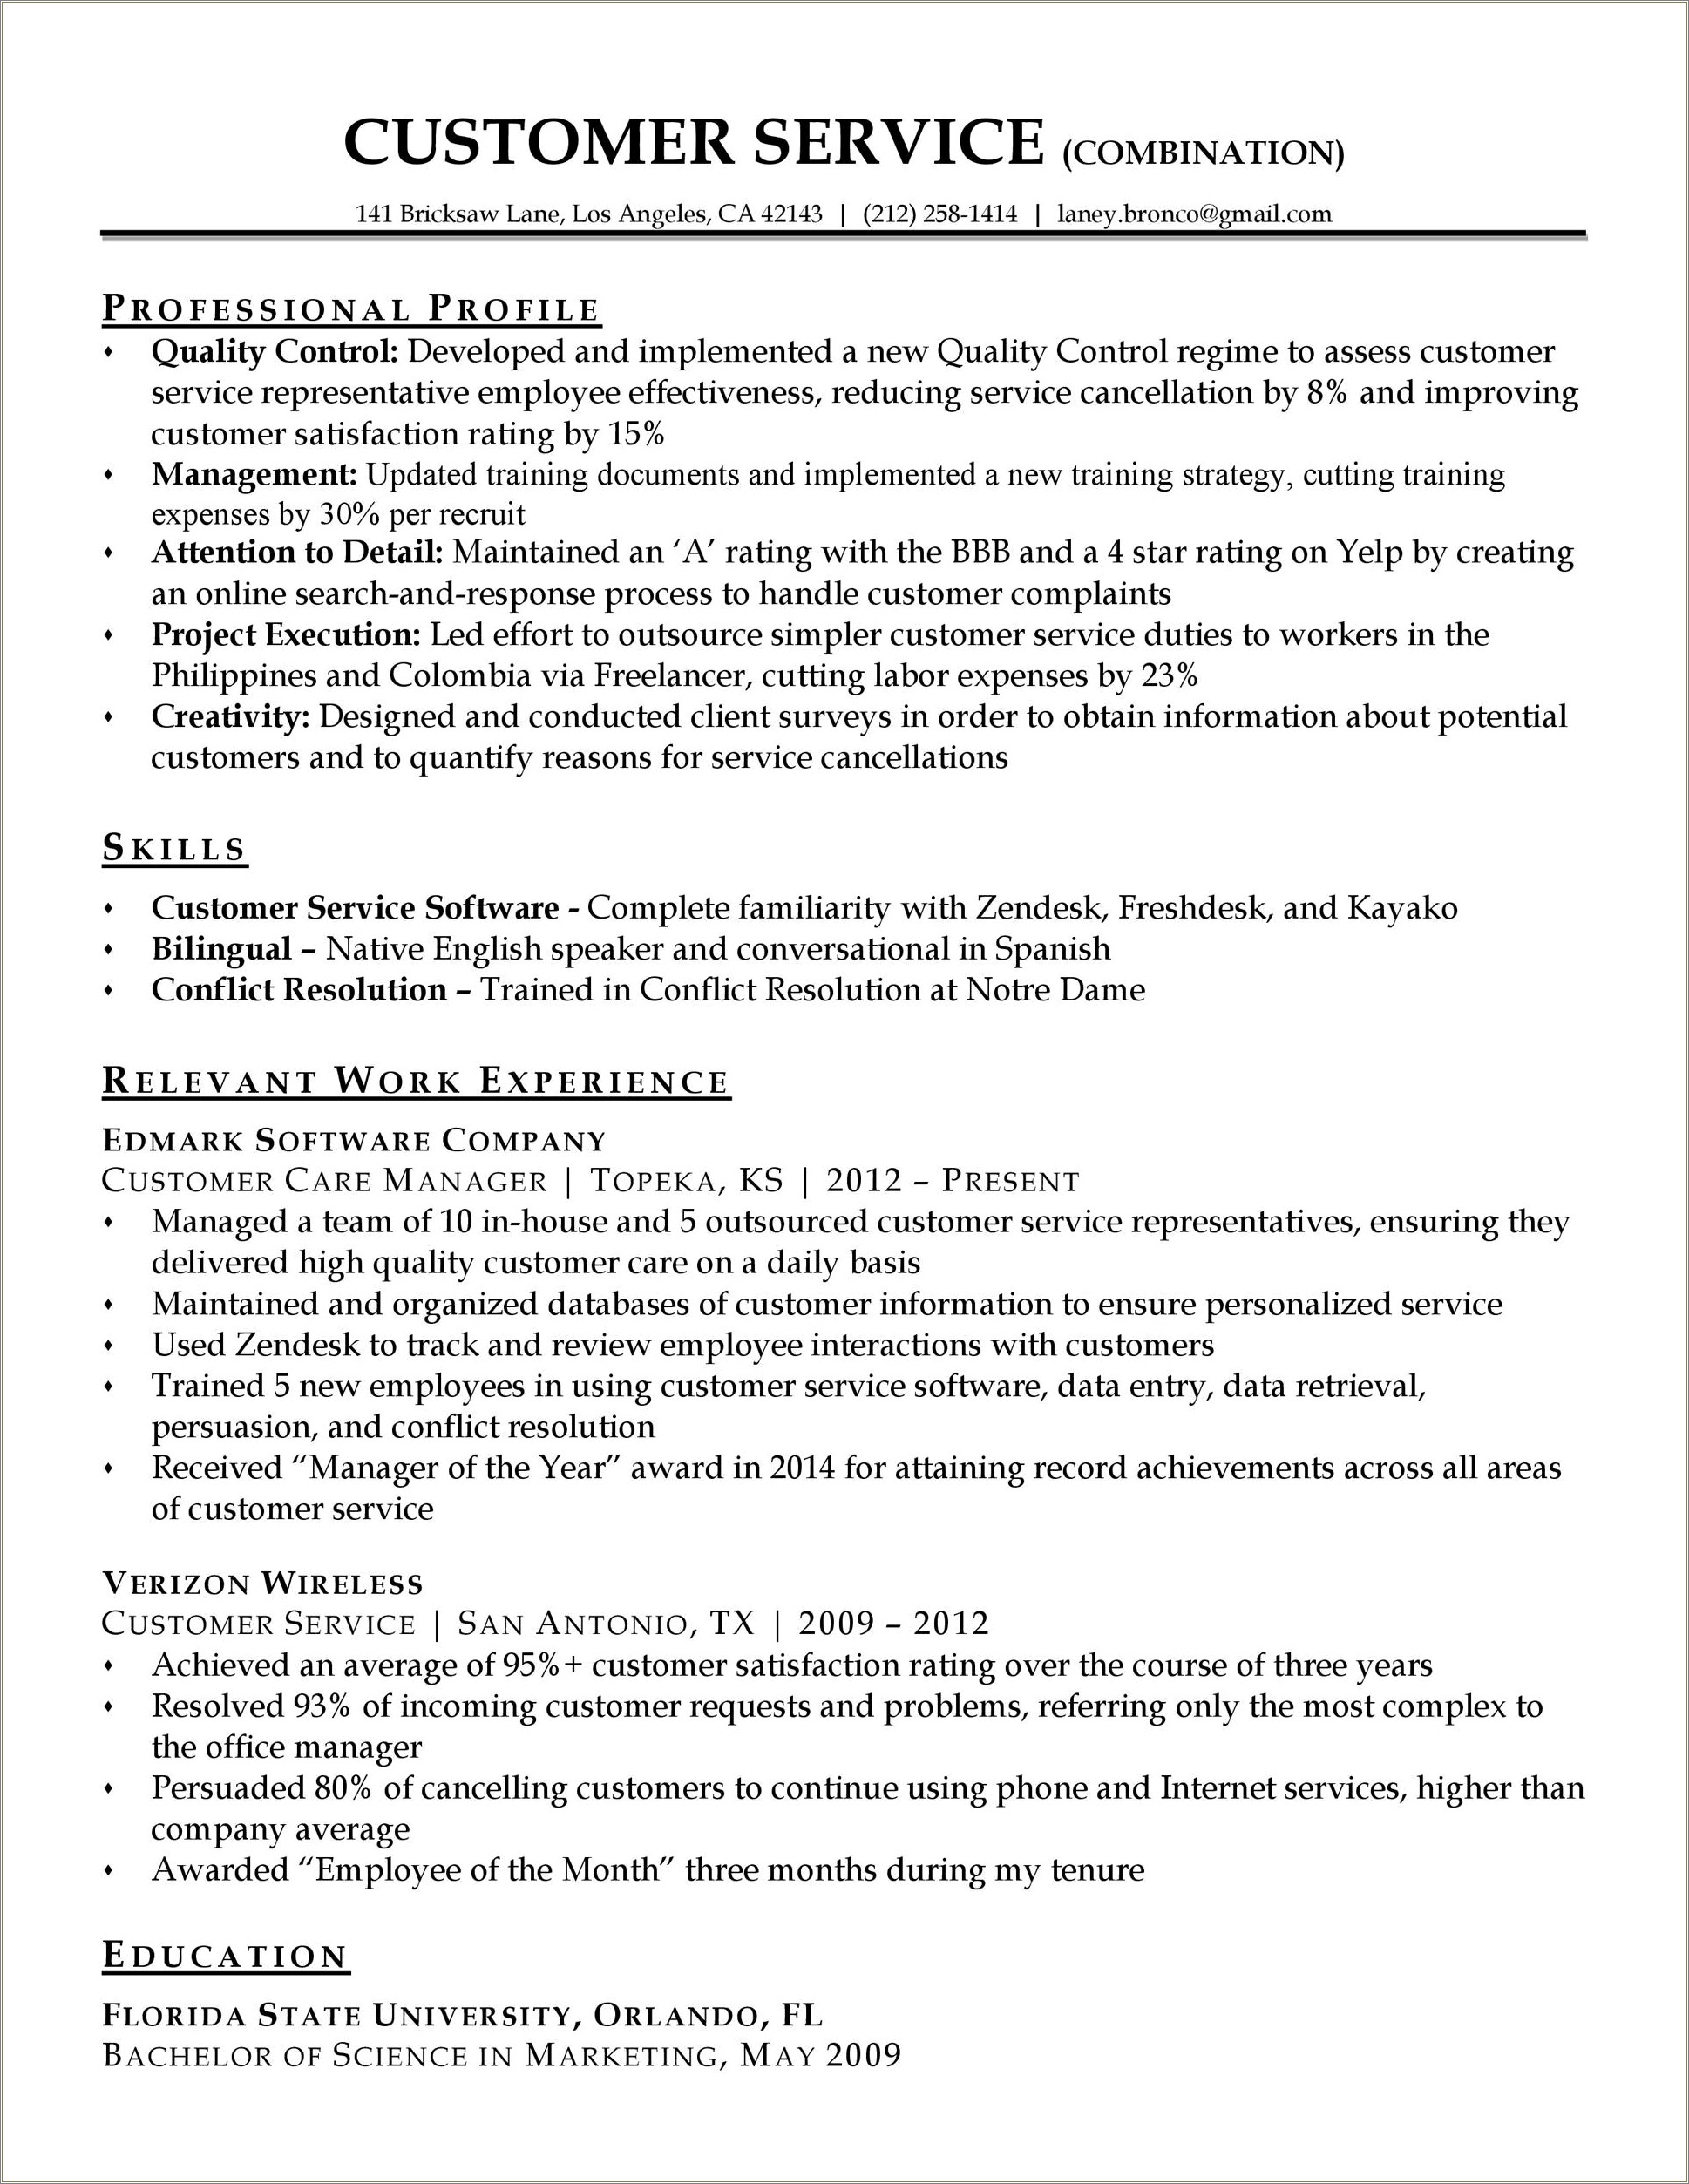 Resume Template For Customer Relationship Manager